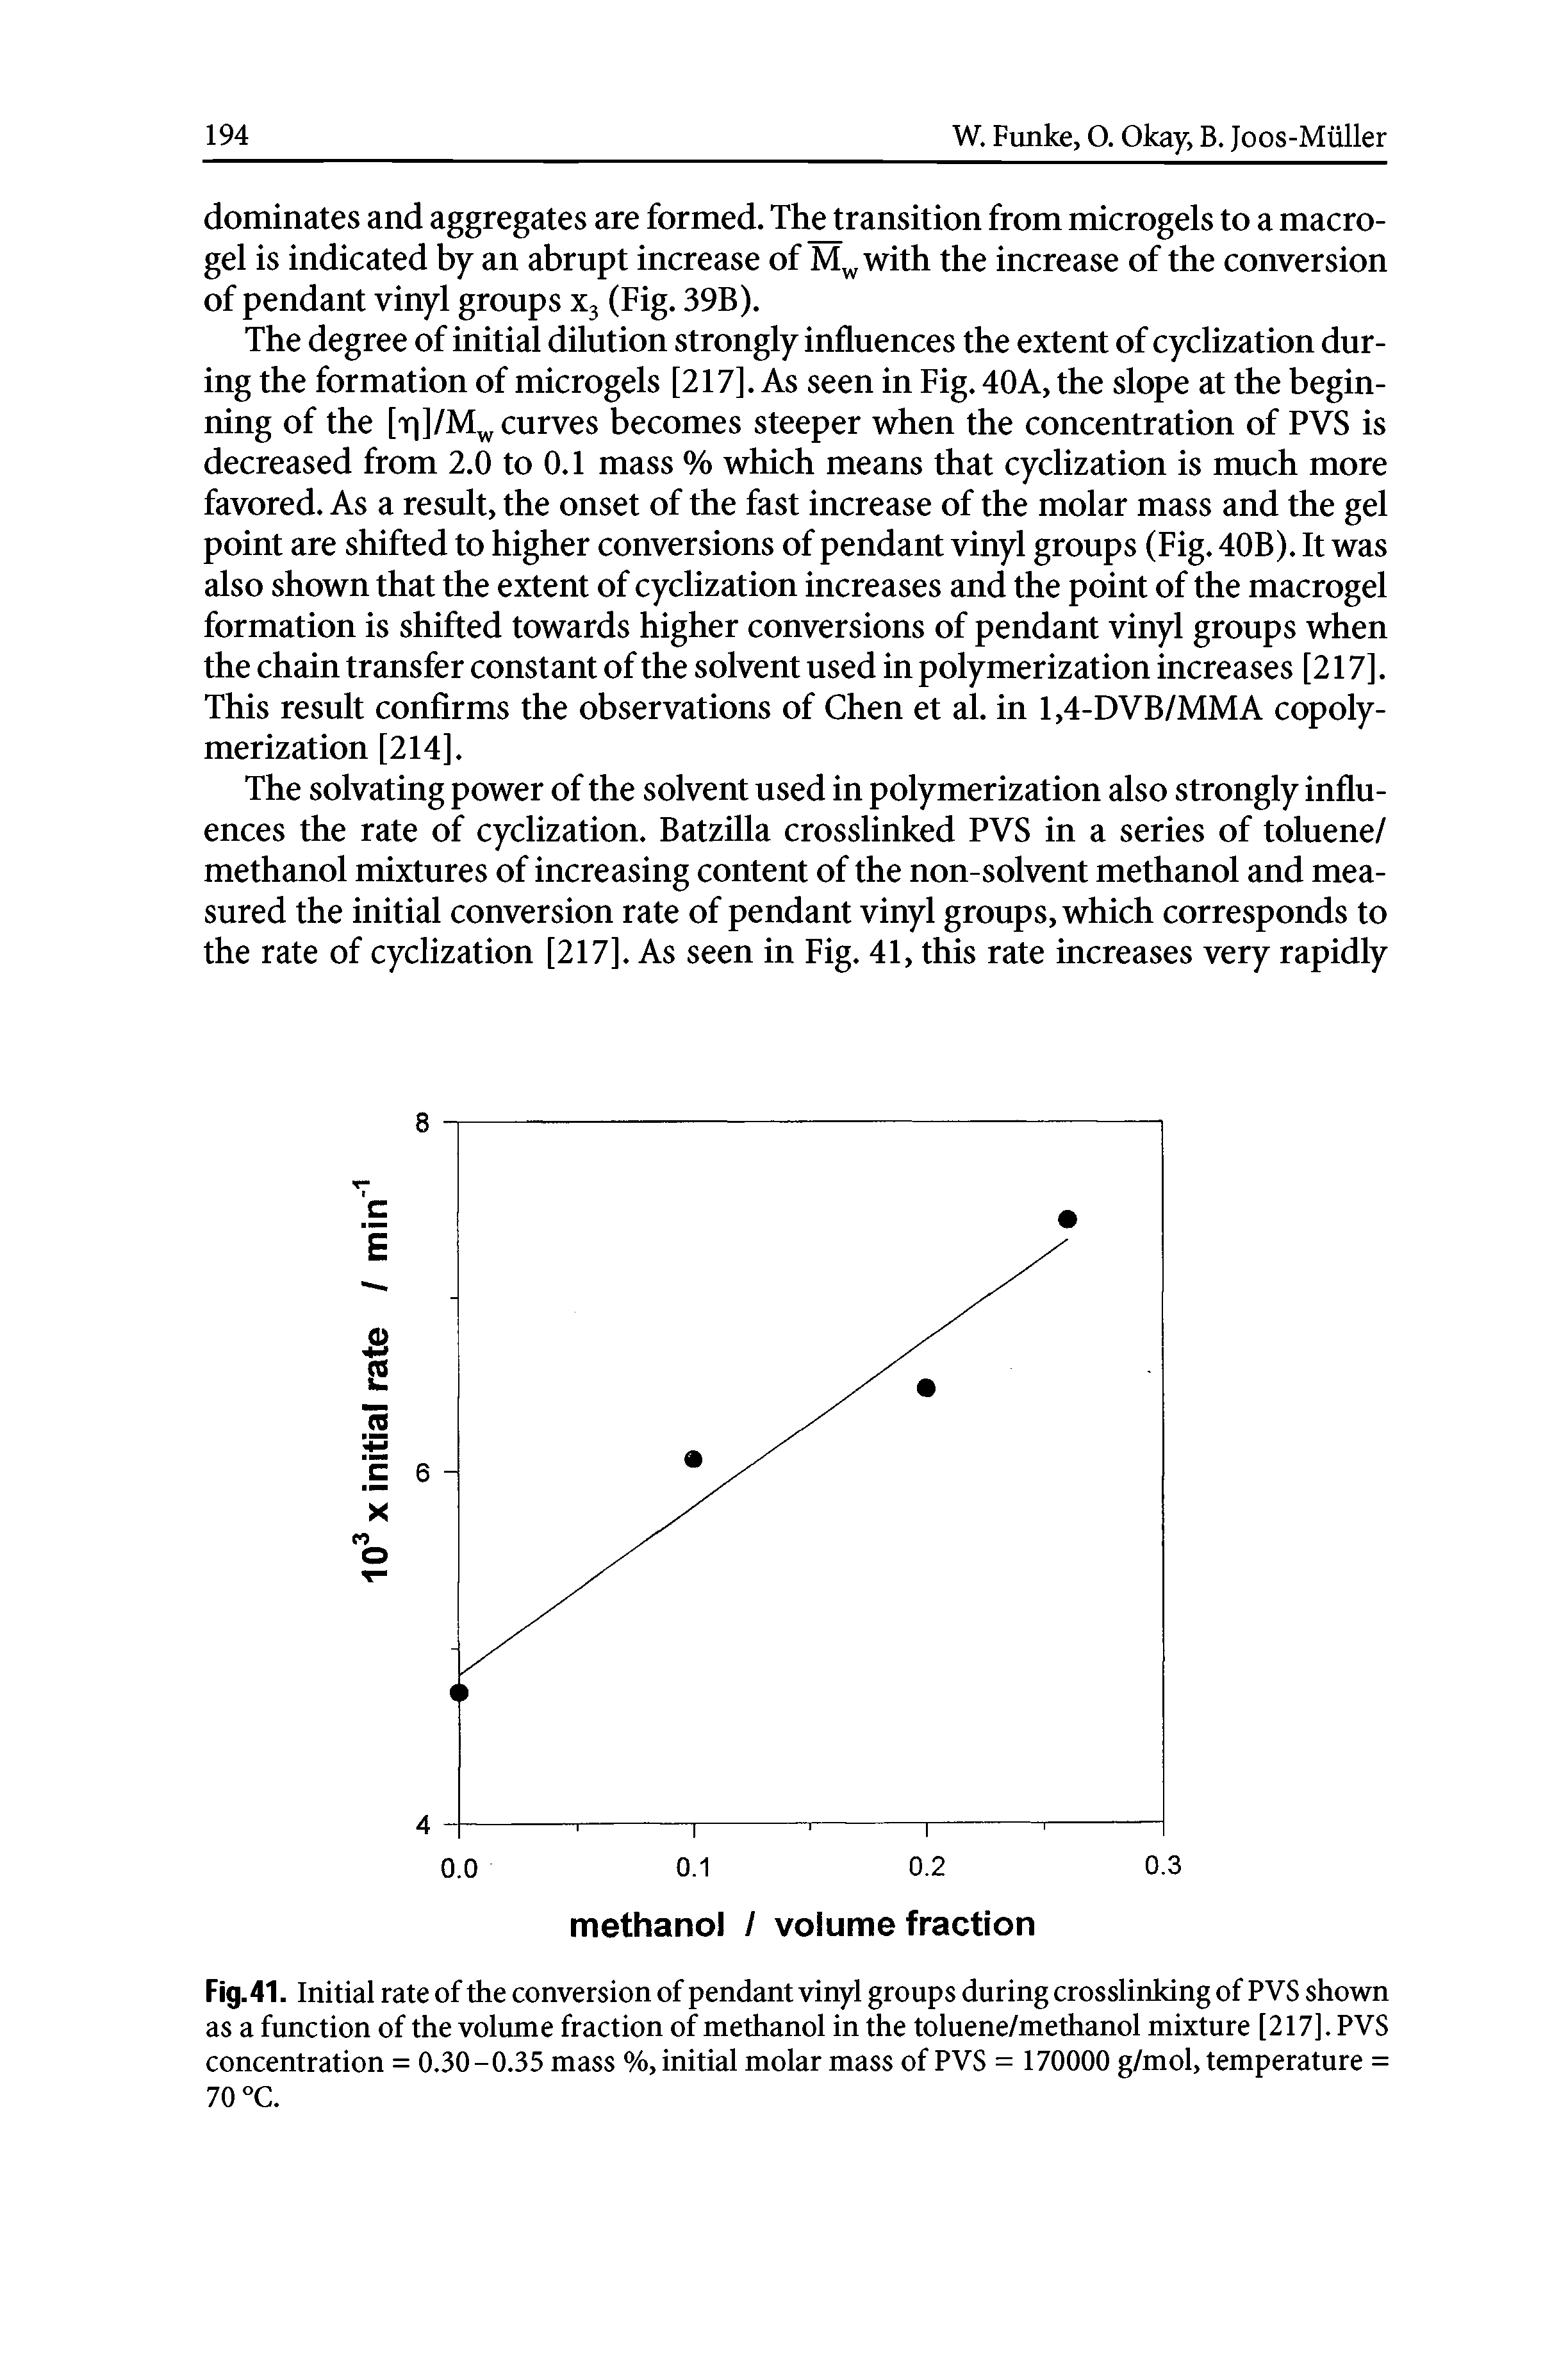 Fig. 41. Initial rate of the conversion of pendant vinyl groups during crosslinking of PVS shown as a function of the volume fraction of methanol in the toluene/methanol mixture [217]. PVS concentration = 0.30-0.35 mass %, initial molar mass of PVS = 170000 g/mol, temperature = 70 °C.